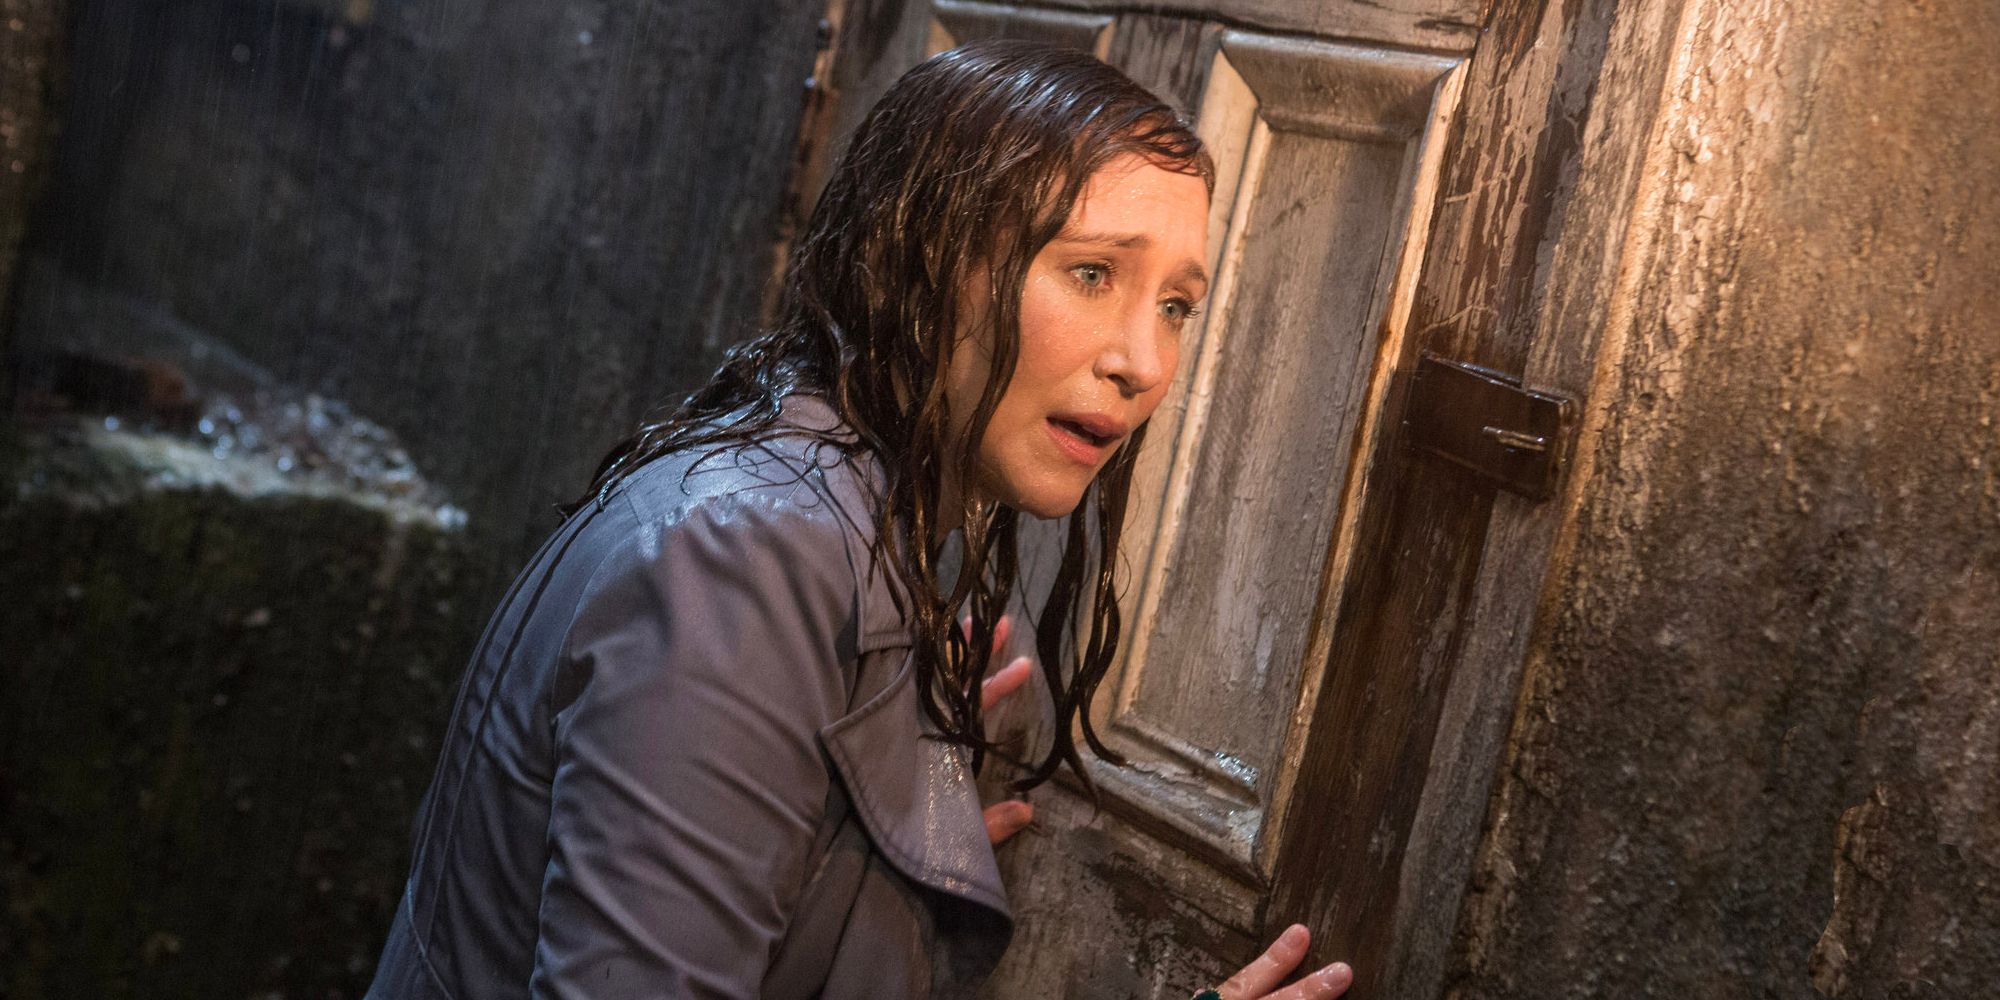 Paranormal investigator and demonologist Lorraine Warren (Vera Farmiga) stands in the rain as she tries to get into a house.